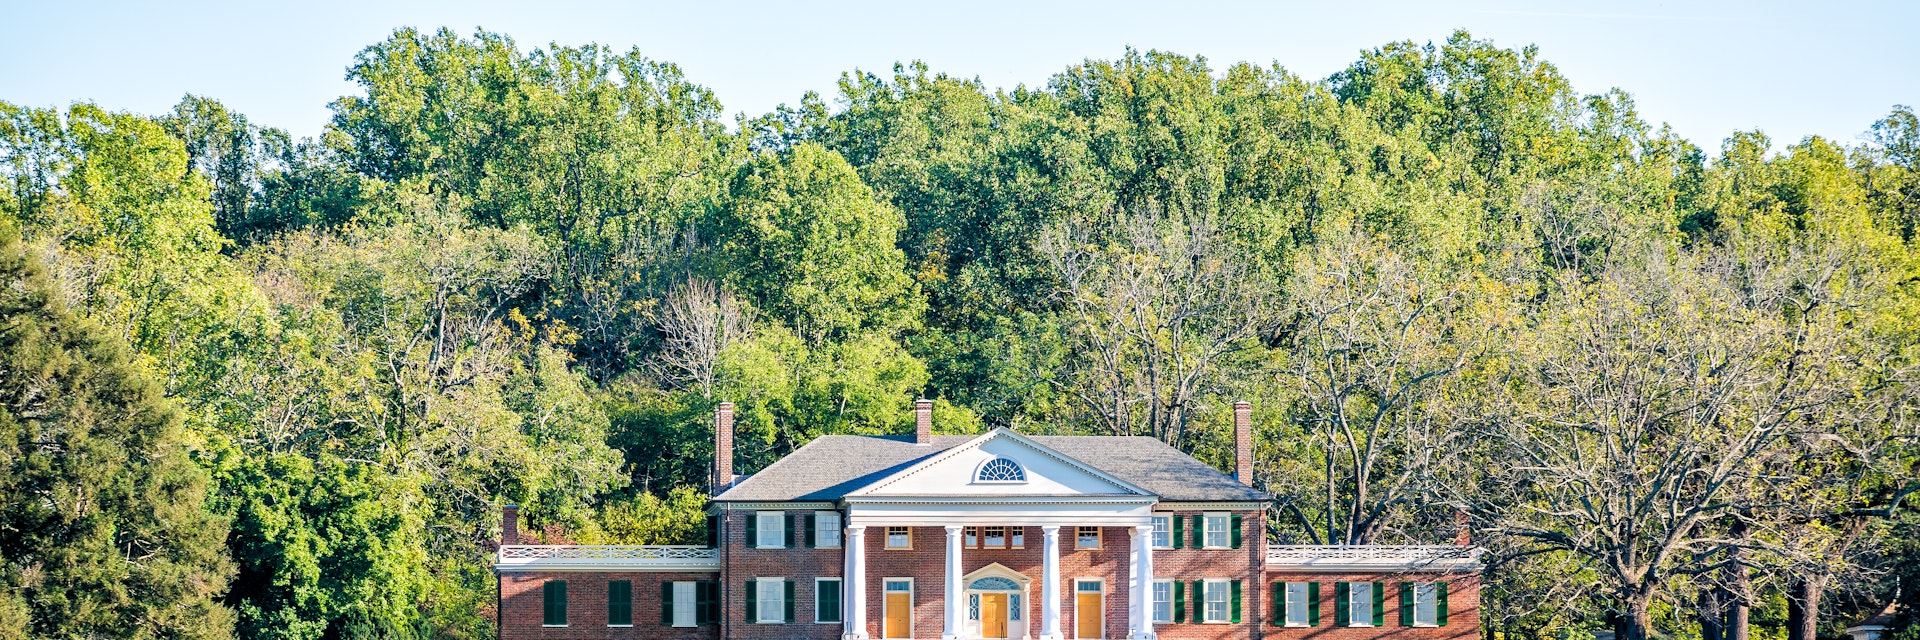 Montpelier, the historic home of James Madison in Virginia.